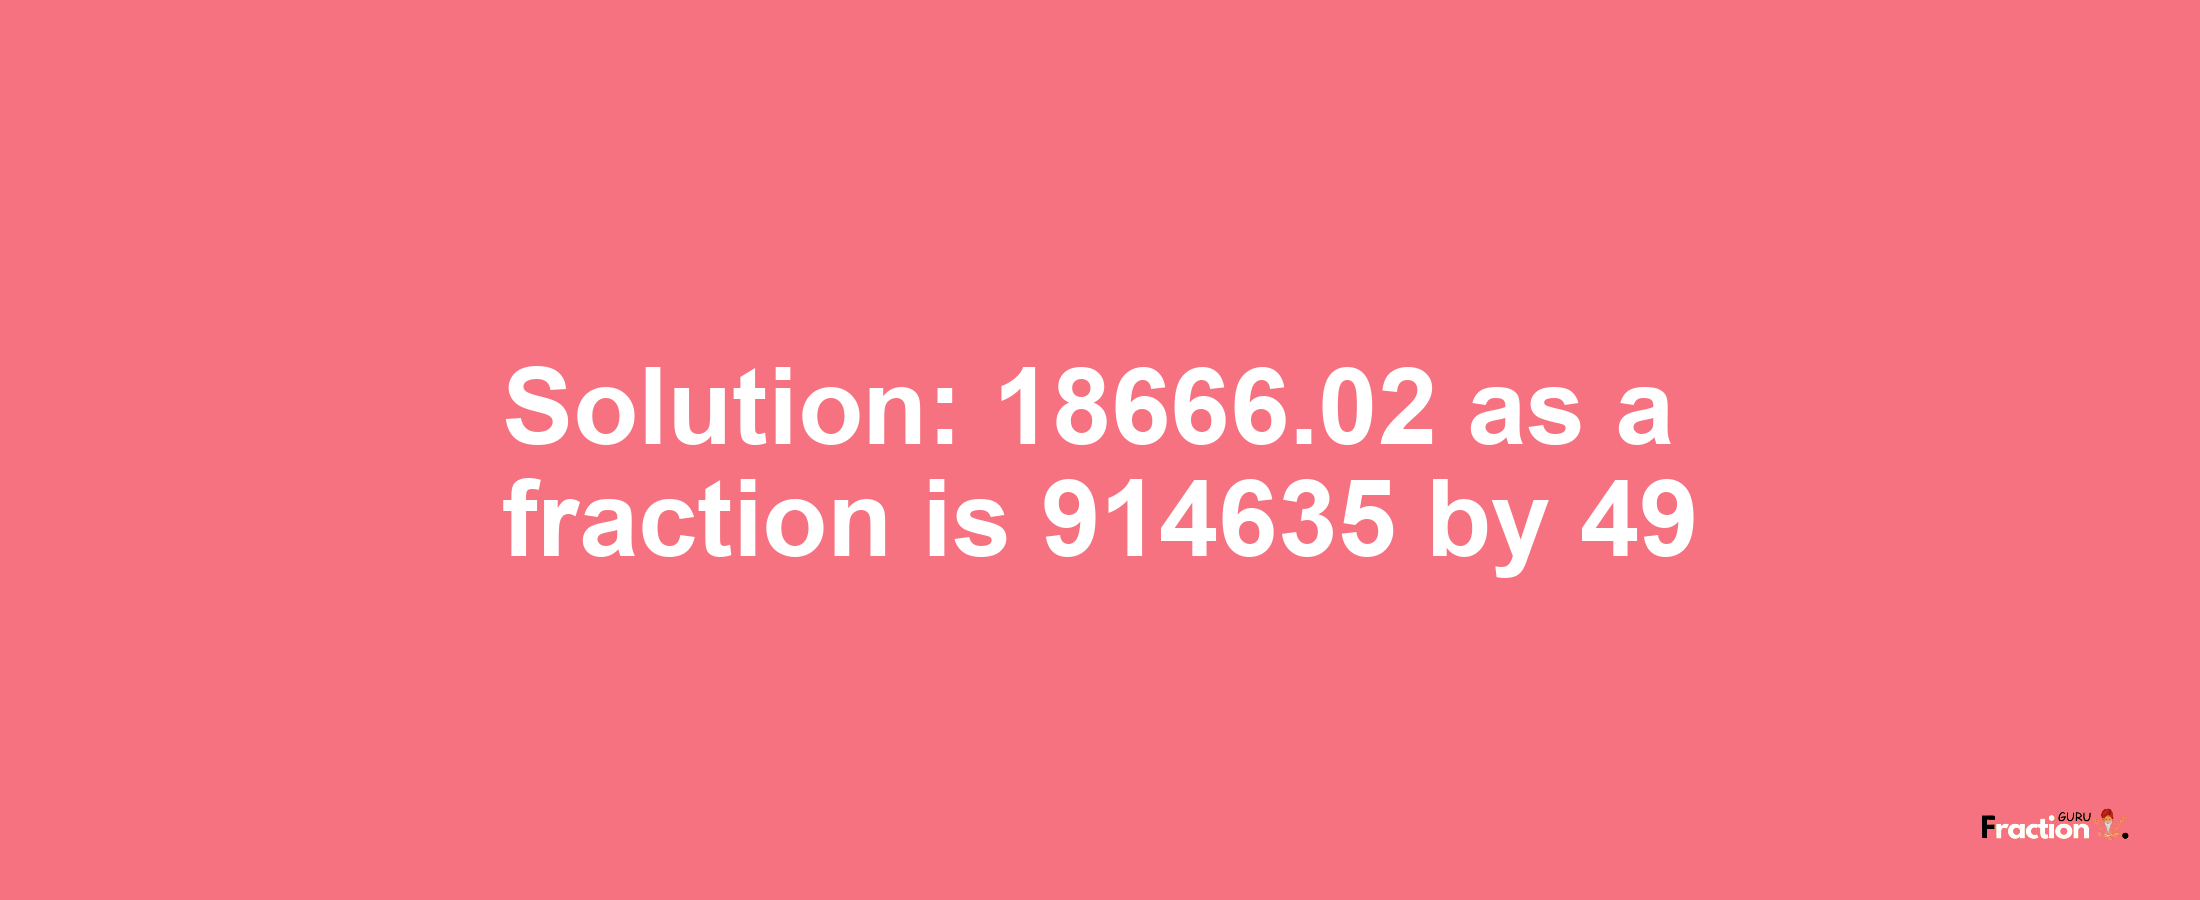 Solution:18666.02 as a fraction is 914635/49